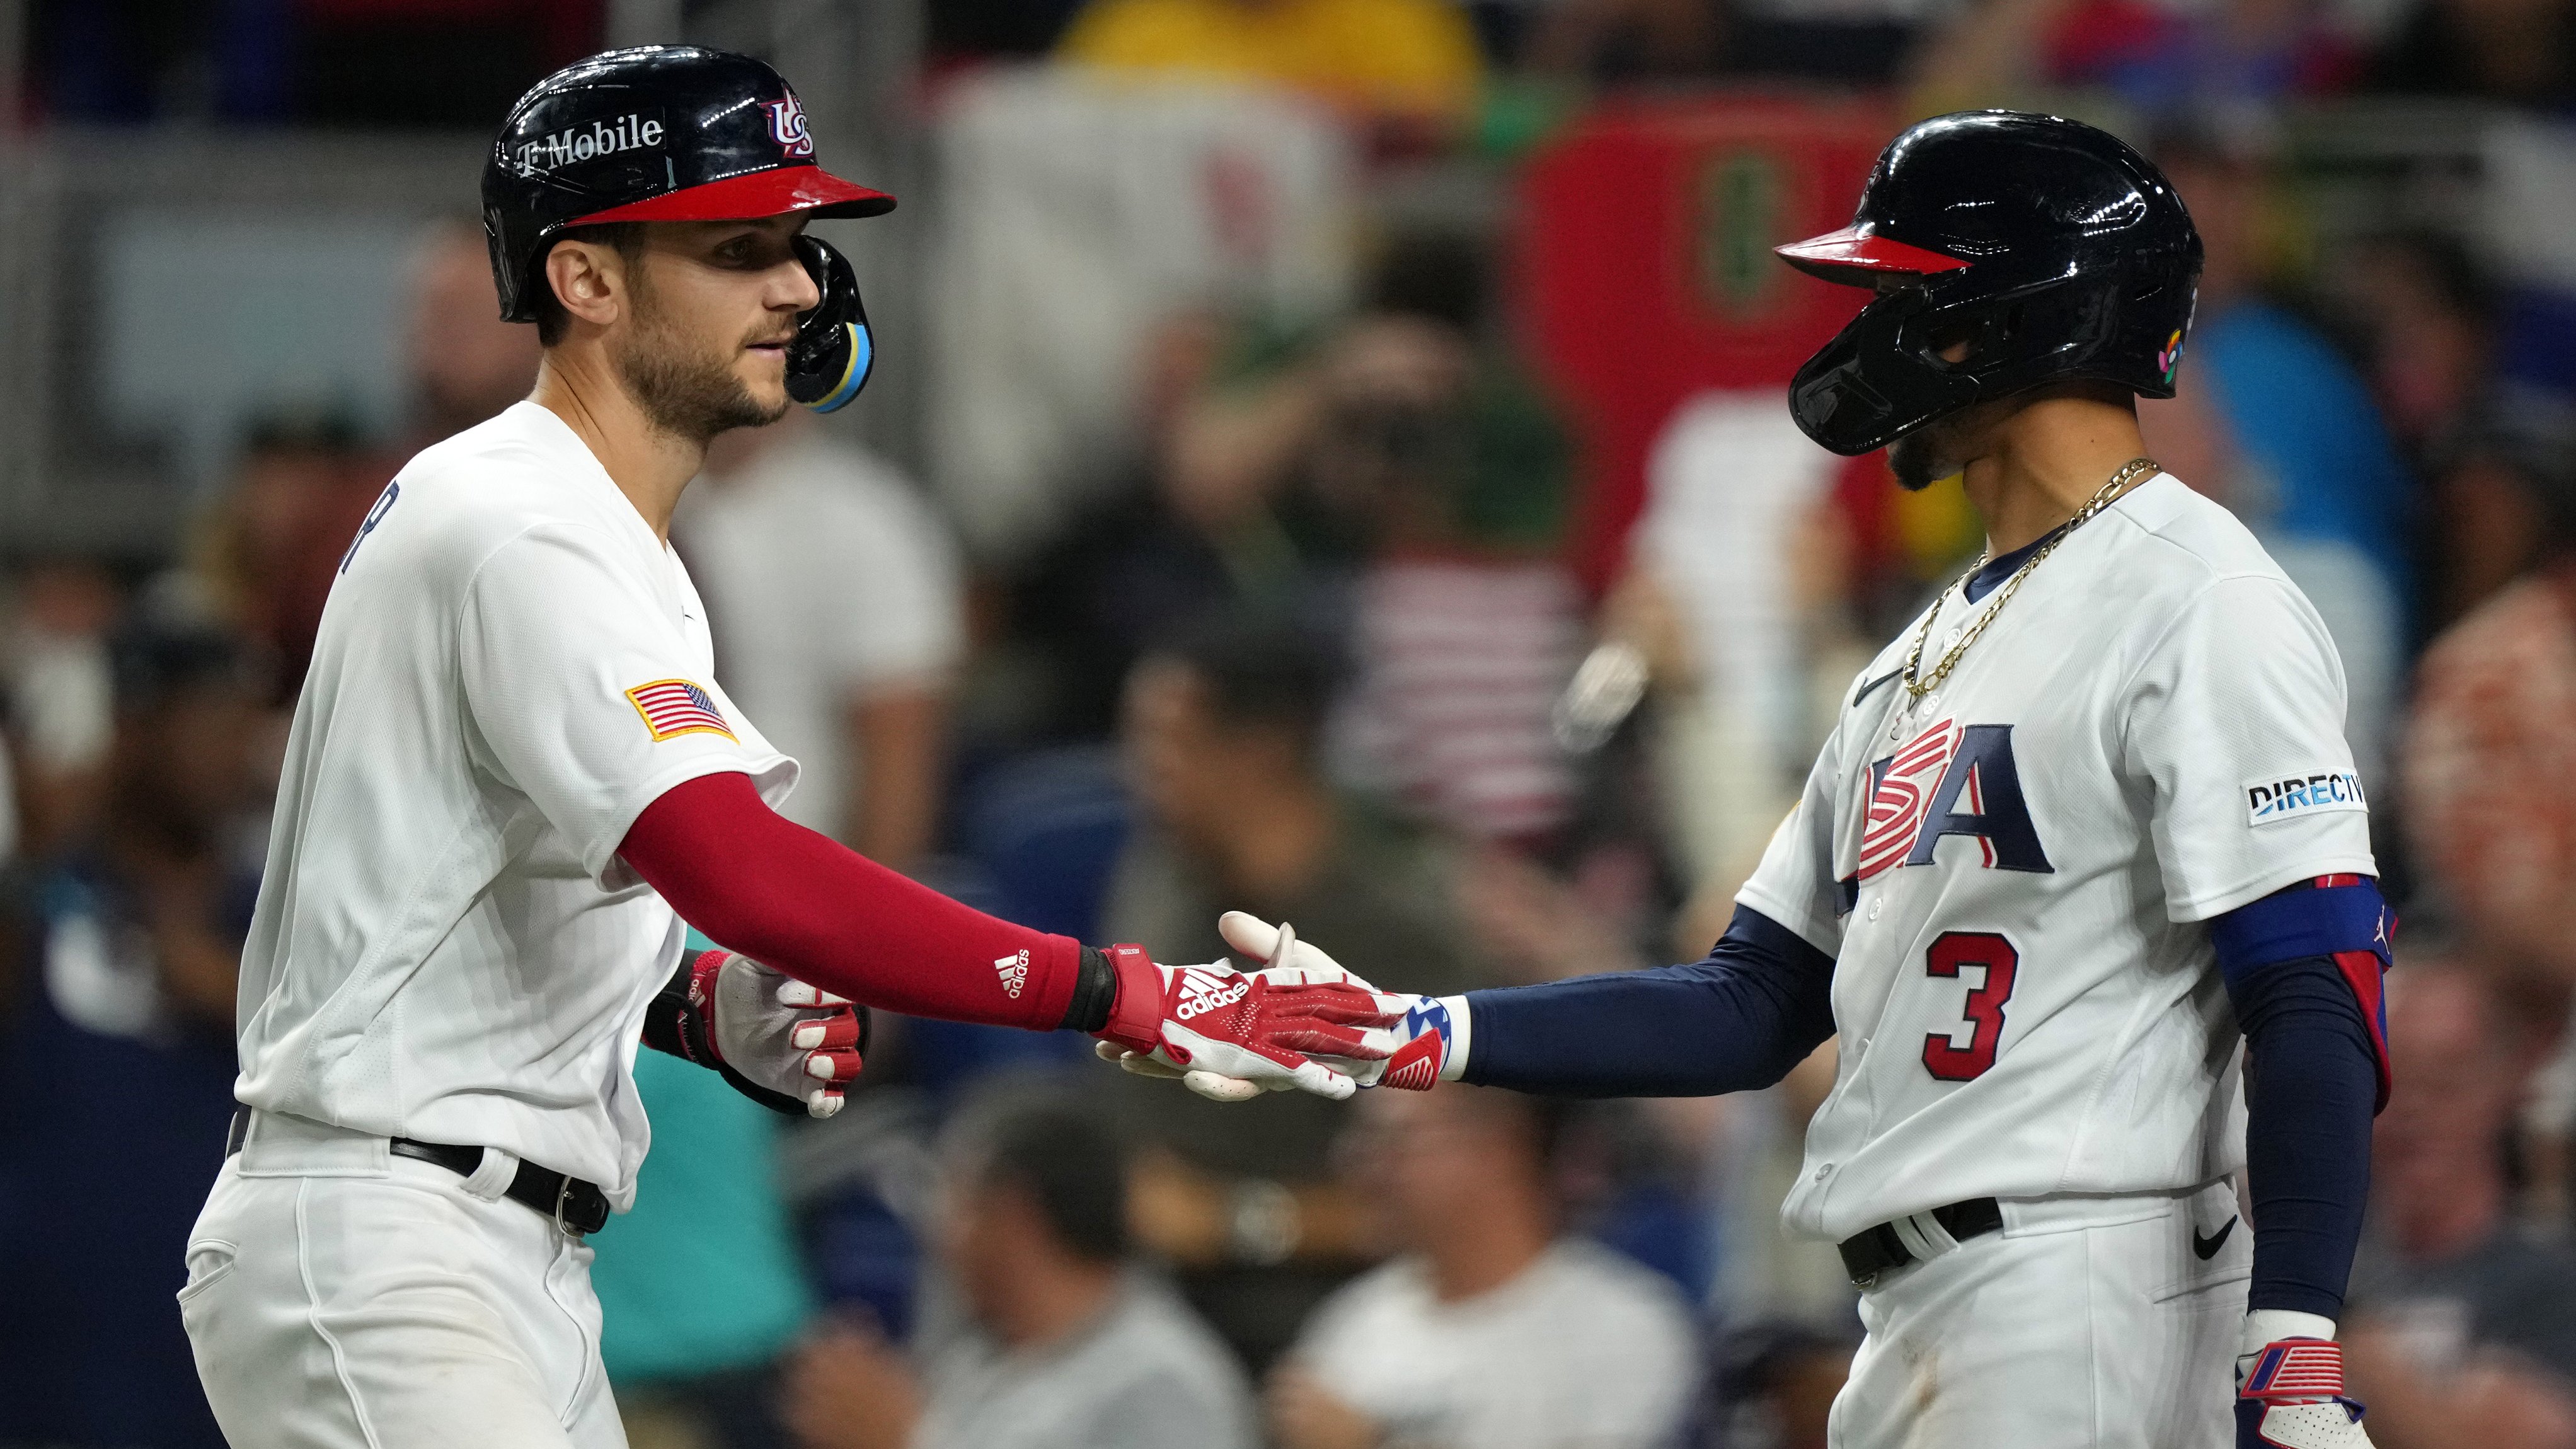 USA World Baseball Classic roster: Mike Trout, Mookie Betts